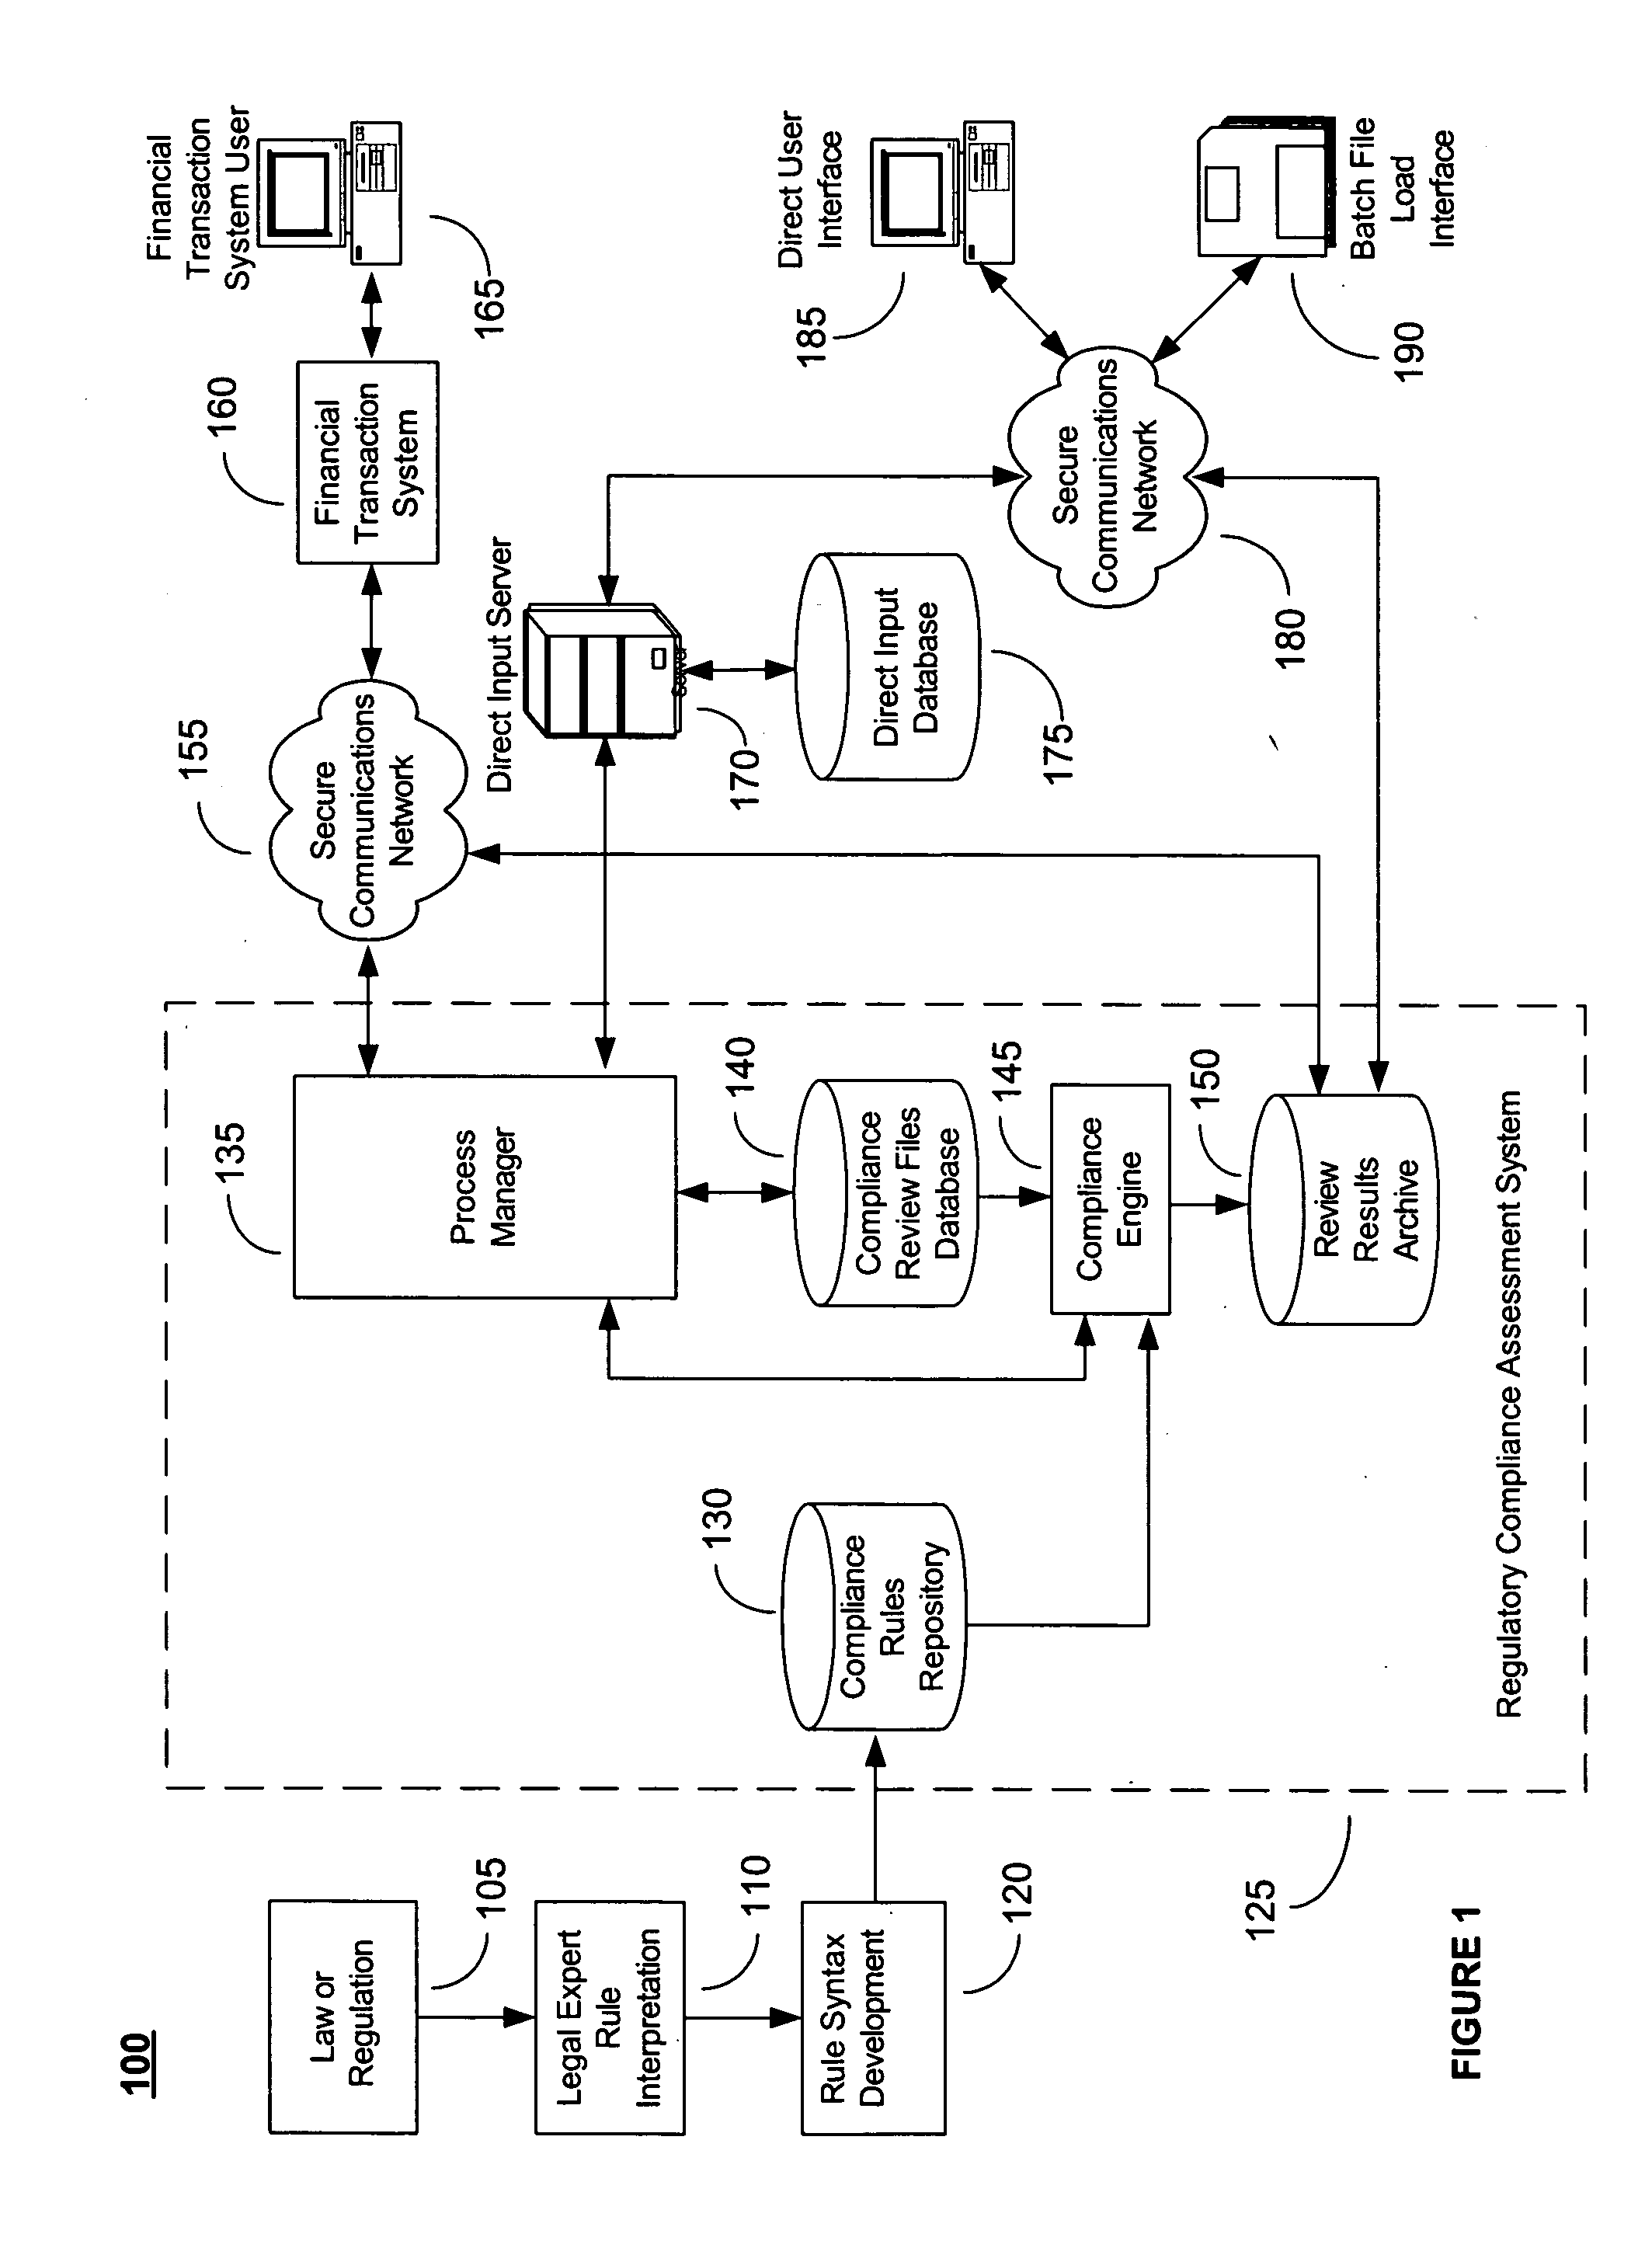 System and method for two-pass regulatory compliance